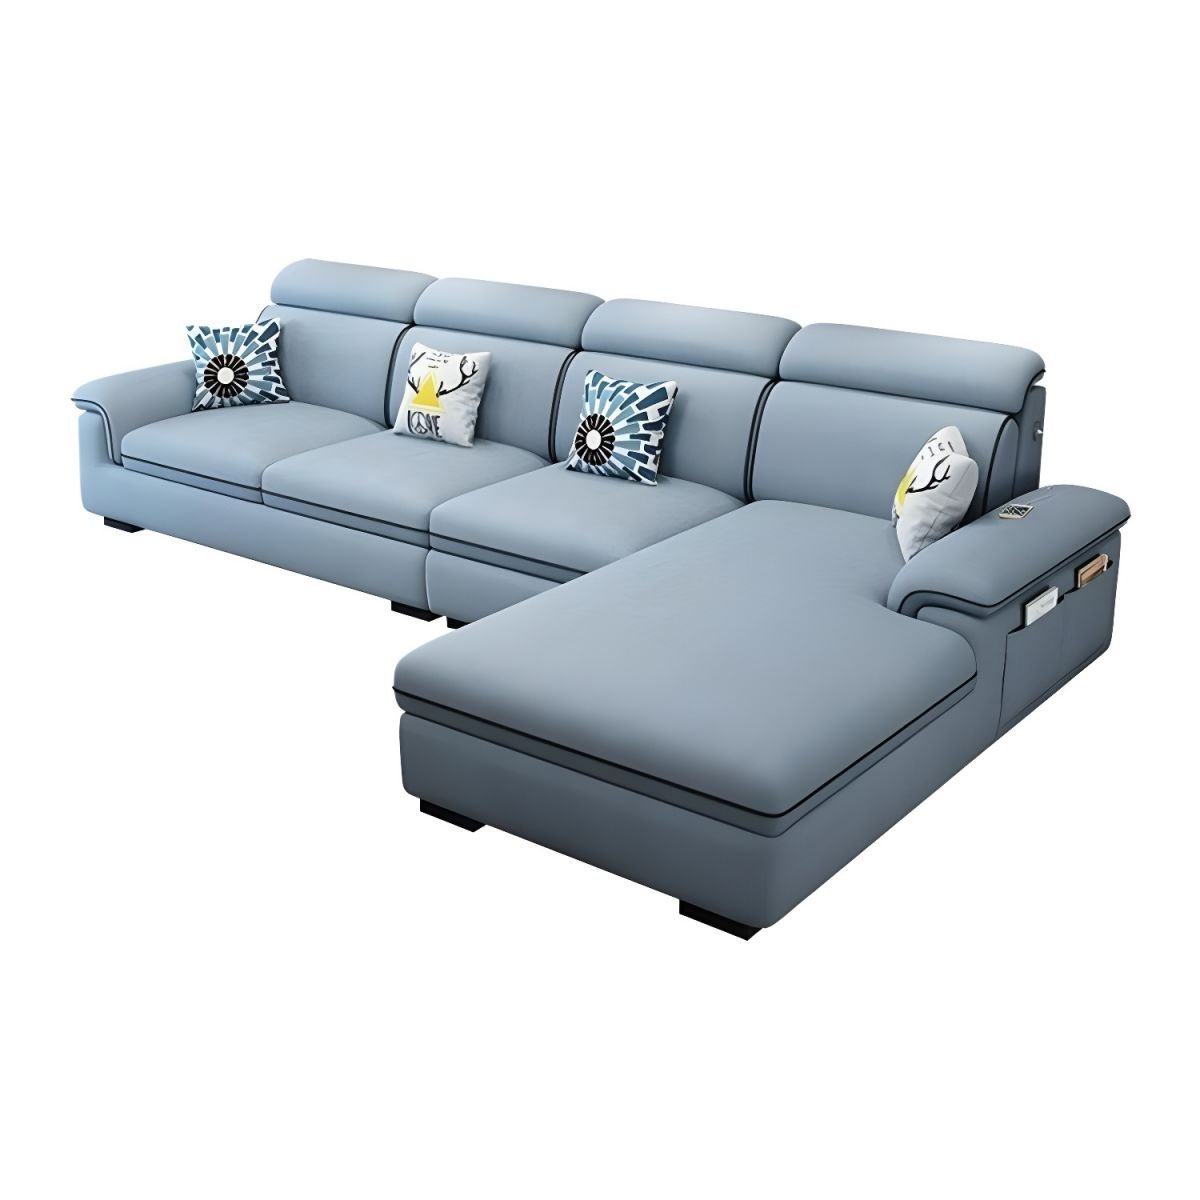 Wooden Modern 9 Feet L-Shape Sectionals No Distressing Seats 4 Storage Included Sofa Chaise - Linen Light Blue Right